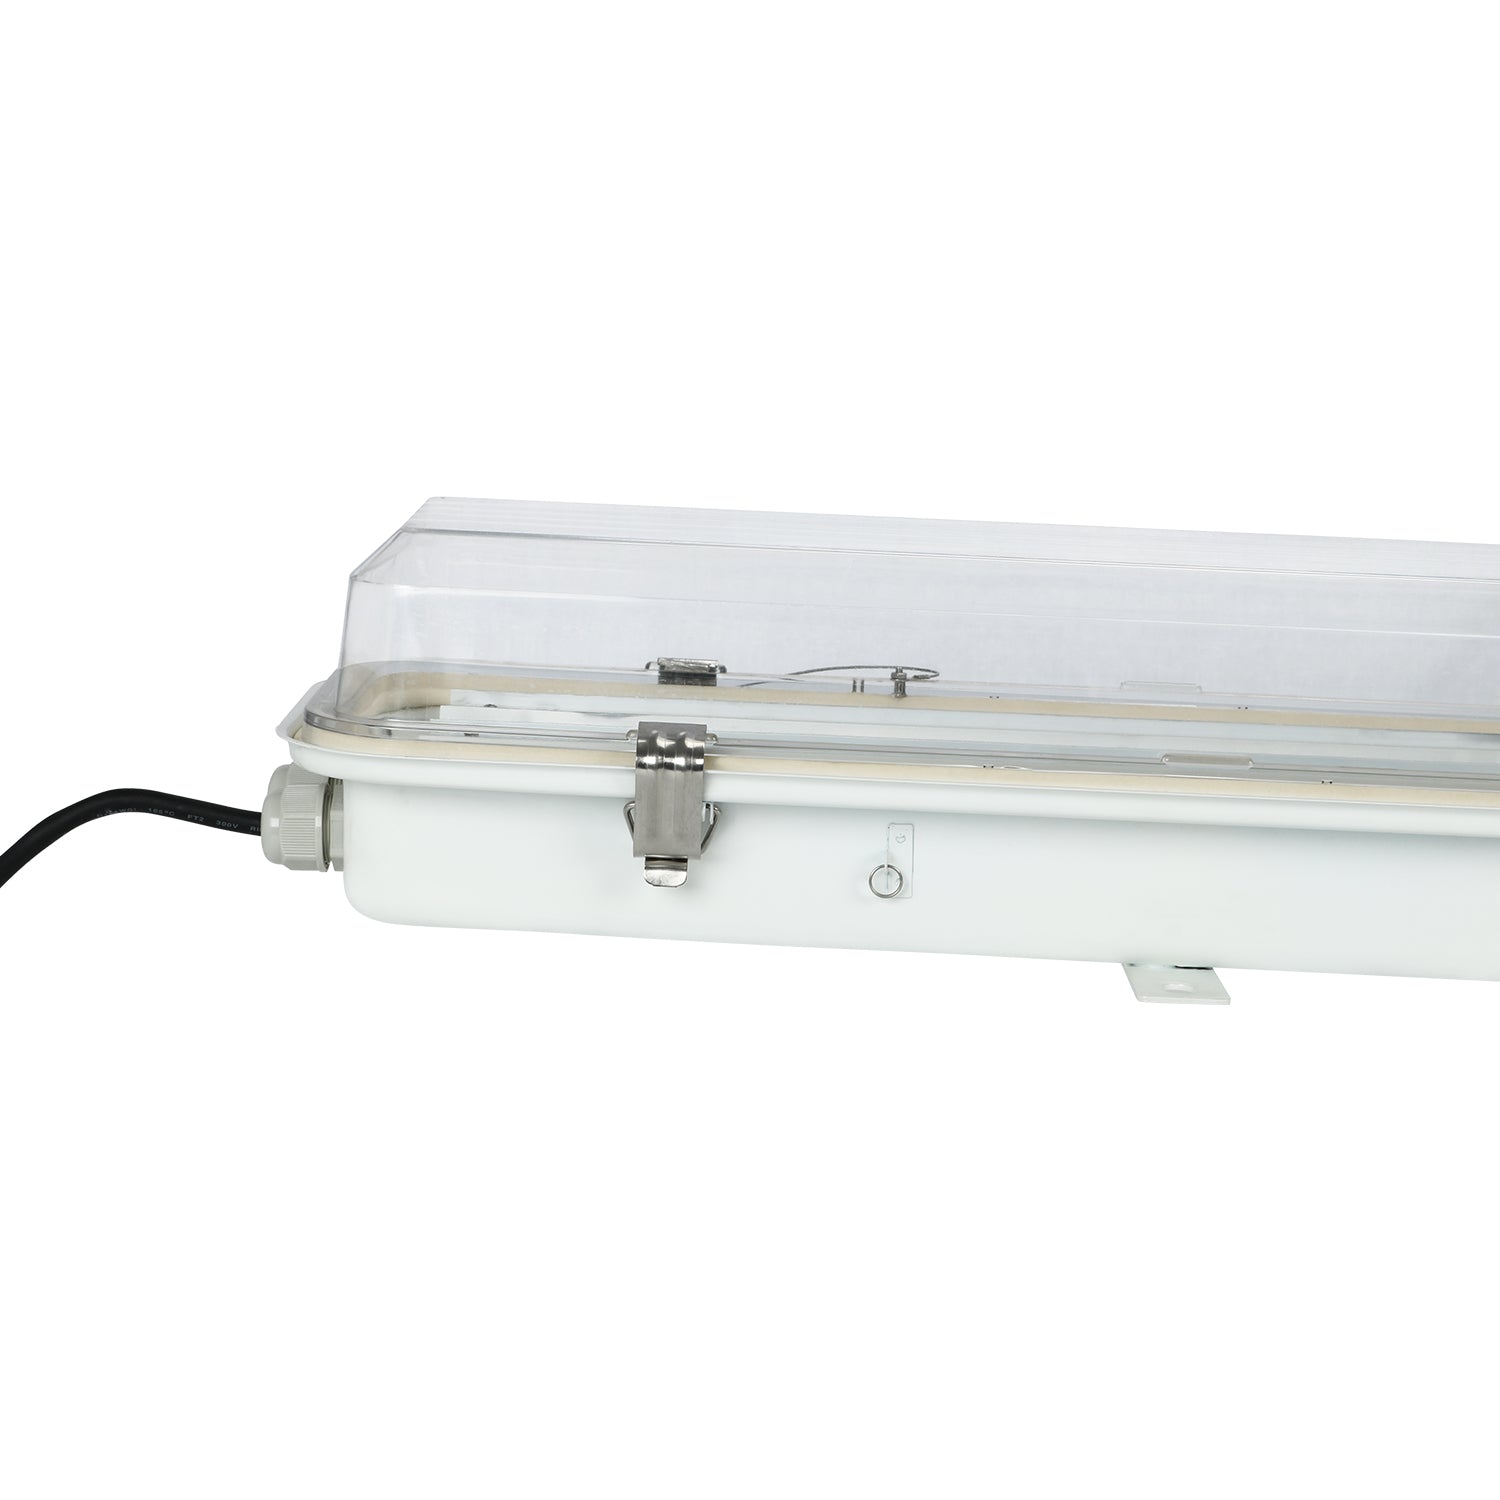 50 Watt 4FT LED Explosion Proof Vapor Proof Light, R Series, Dimmable, 5000K, 7000LM, AC100-277V, IP66, Ideal for Oil & Gas Refineries, Drilling Rigs, Petrochemical Facilities